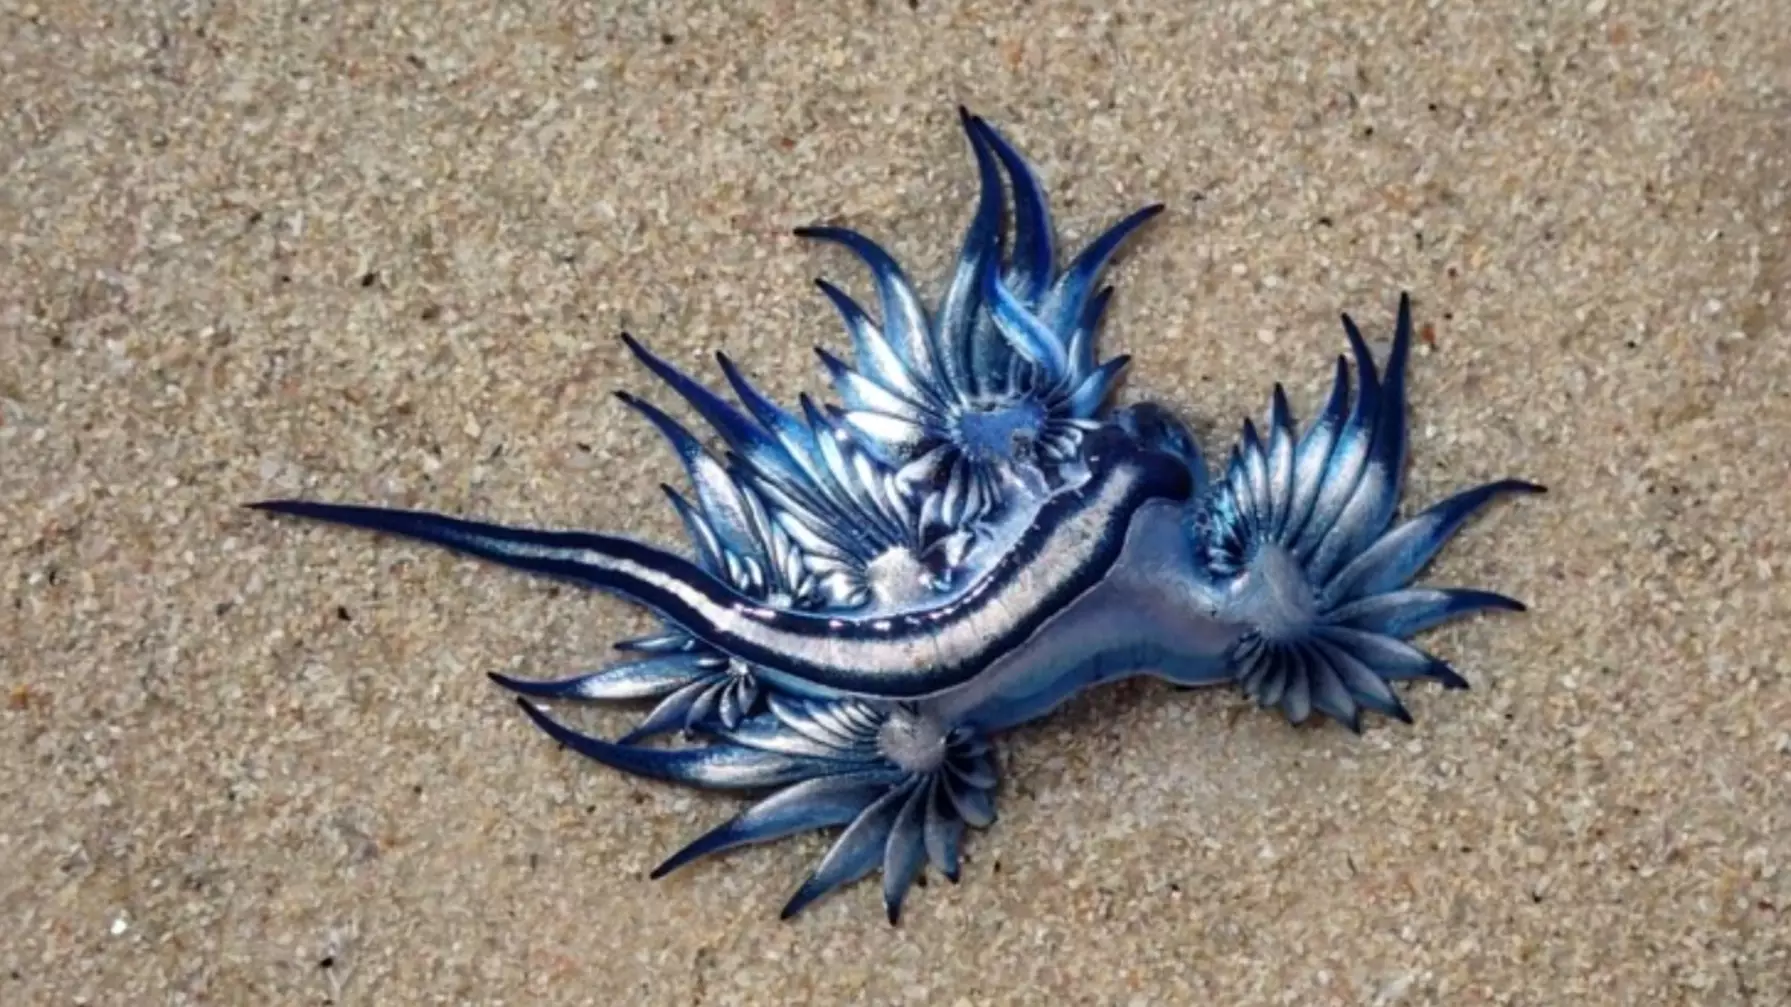 Poisonous Blue Dragons Wash Up On Beach In South Africa 